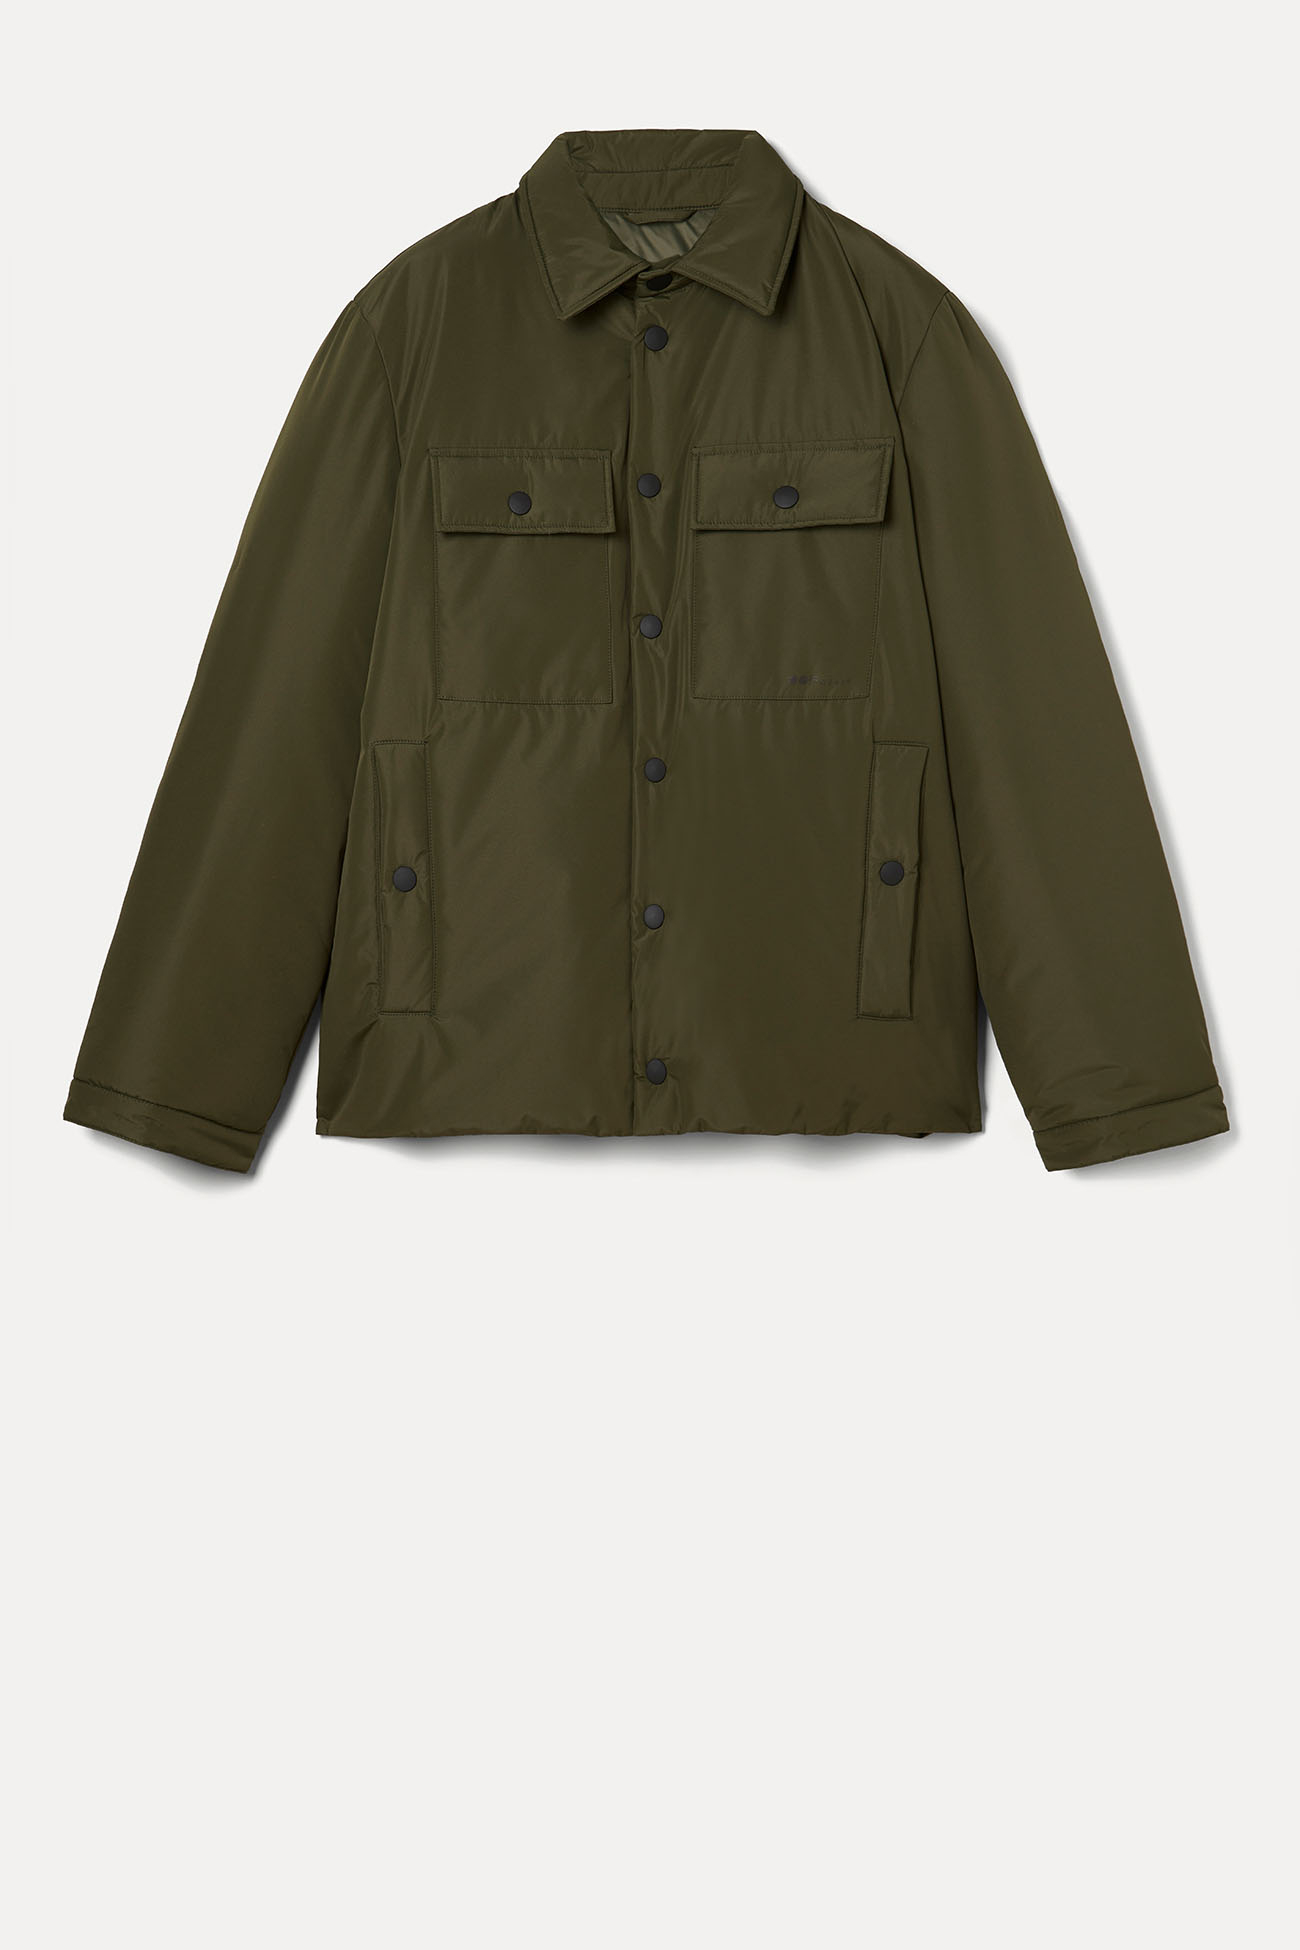 JACKET 5280 MADE IN WATER RESISTANT NYLON - MOSS GREEN - OOF WEAR